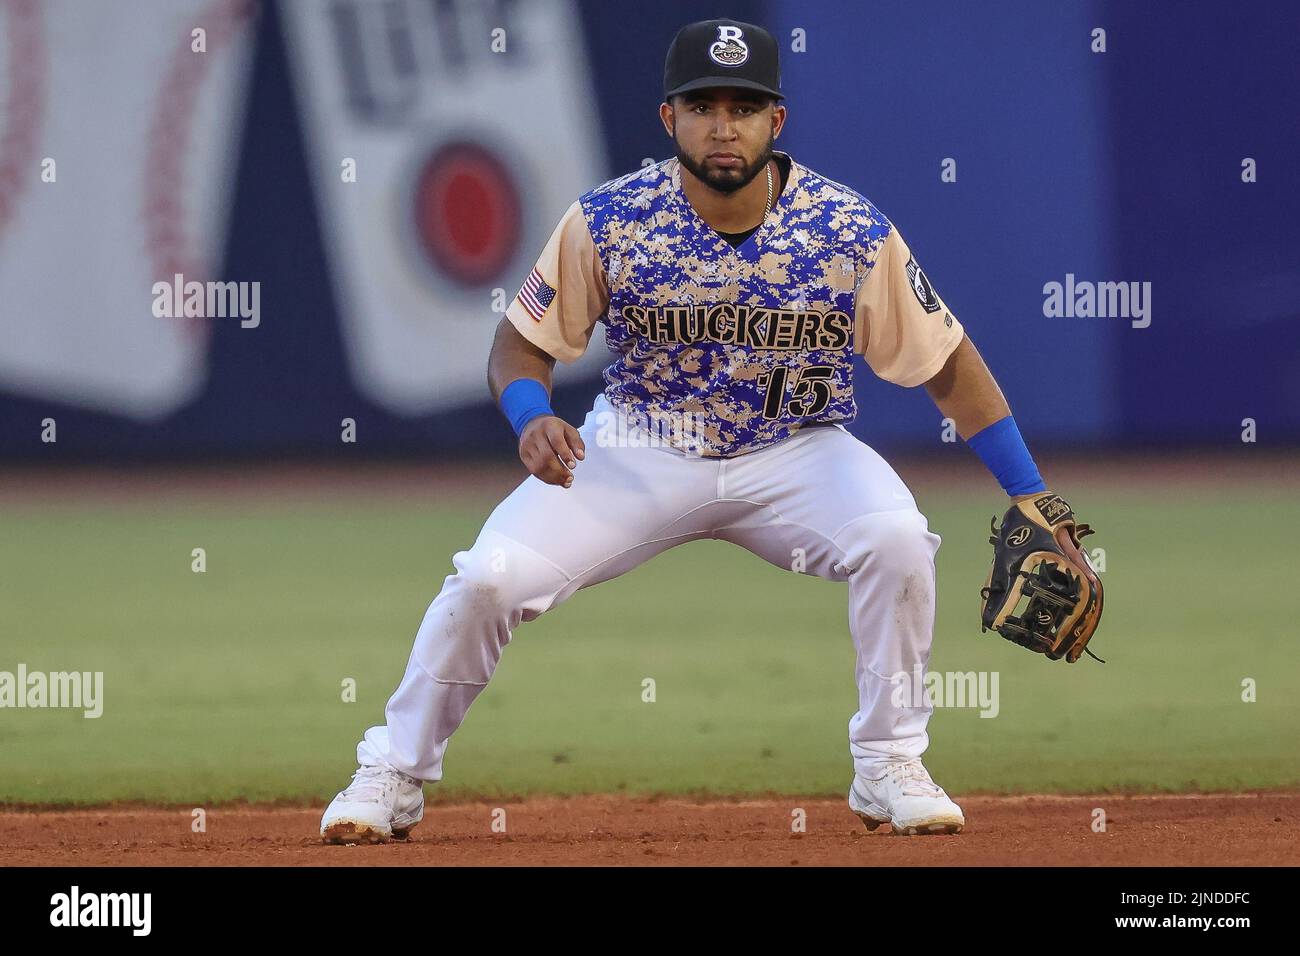 August 10, 2022: Biloxi Shuckers infielder Felix Valerio (15) stands ready for action during an MiLB game between the Biloxi Shuckers and Rocket City Trash Pandas at MGM Park in Biloxi, Mississippi. Bobby McDuffie/CSM Stock Photo